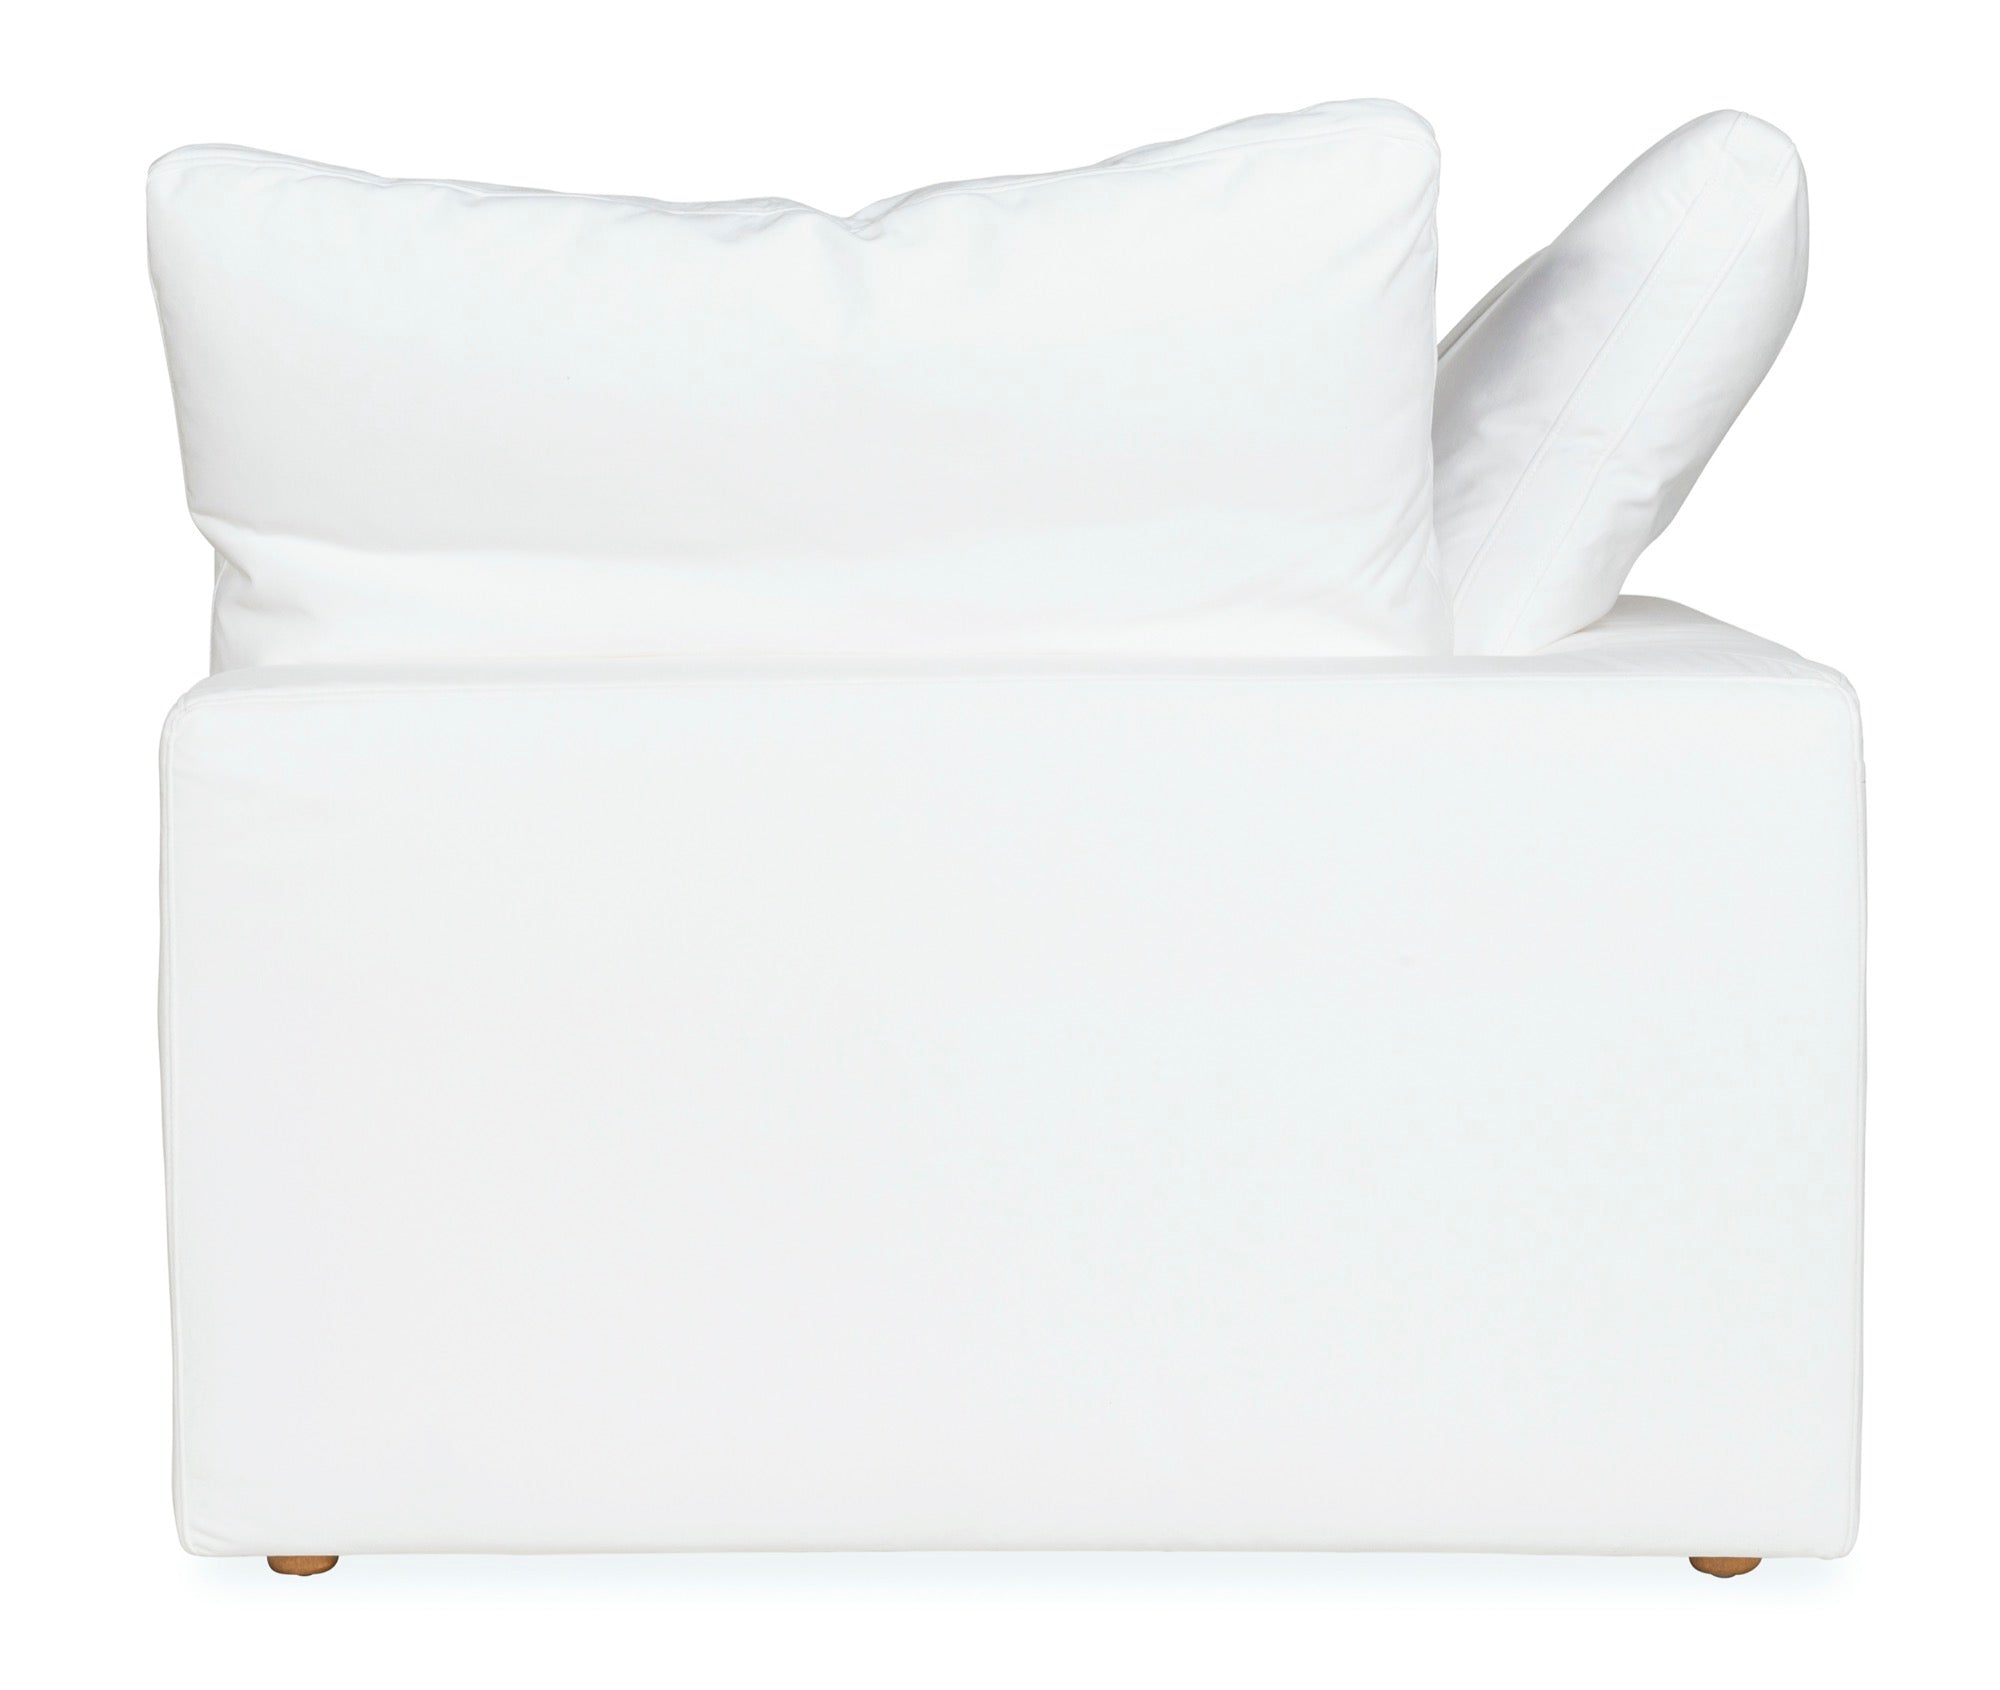 Movie Night™ Corner Chair, Standard, Brie (Left or Right) - Image 6